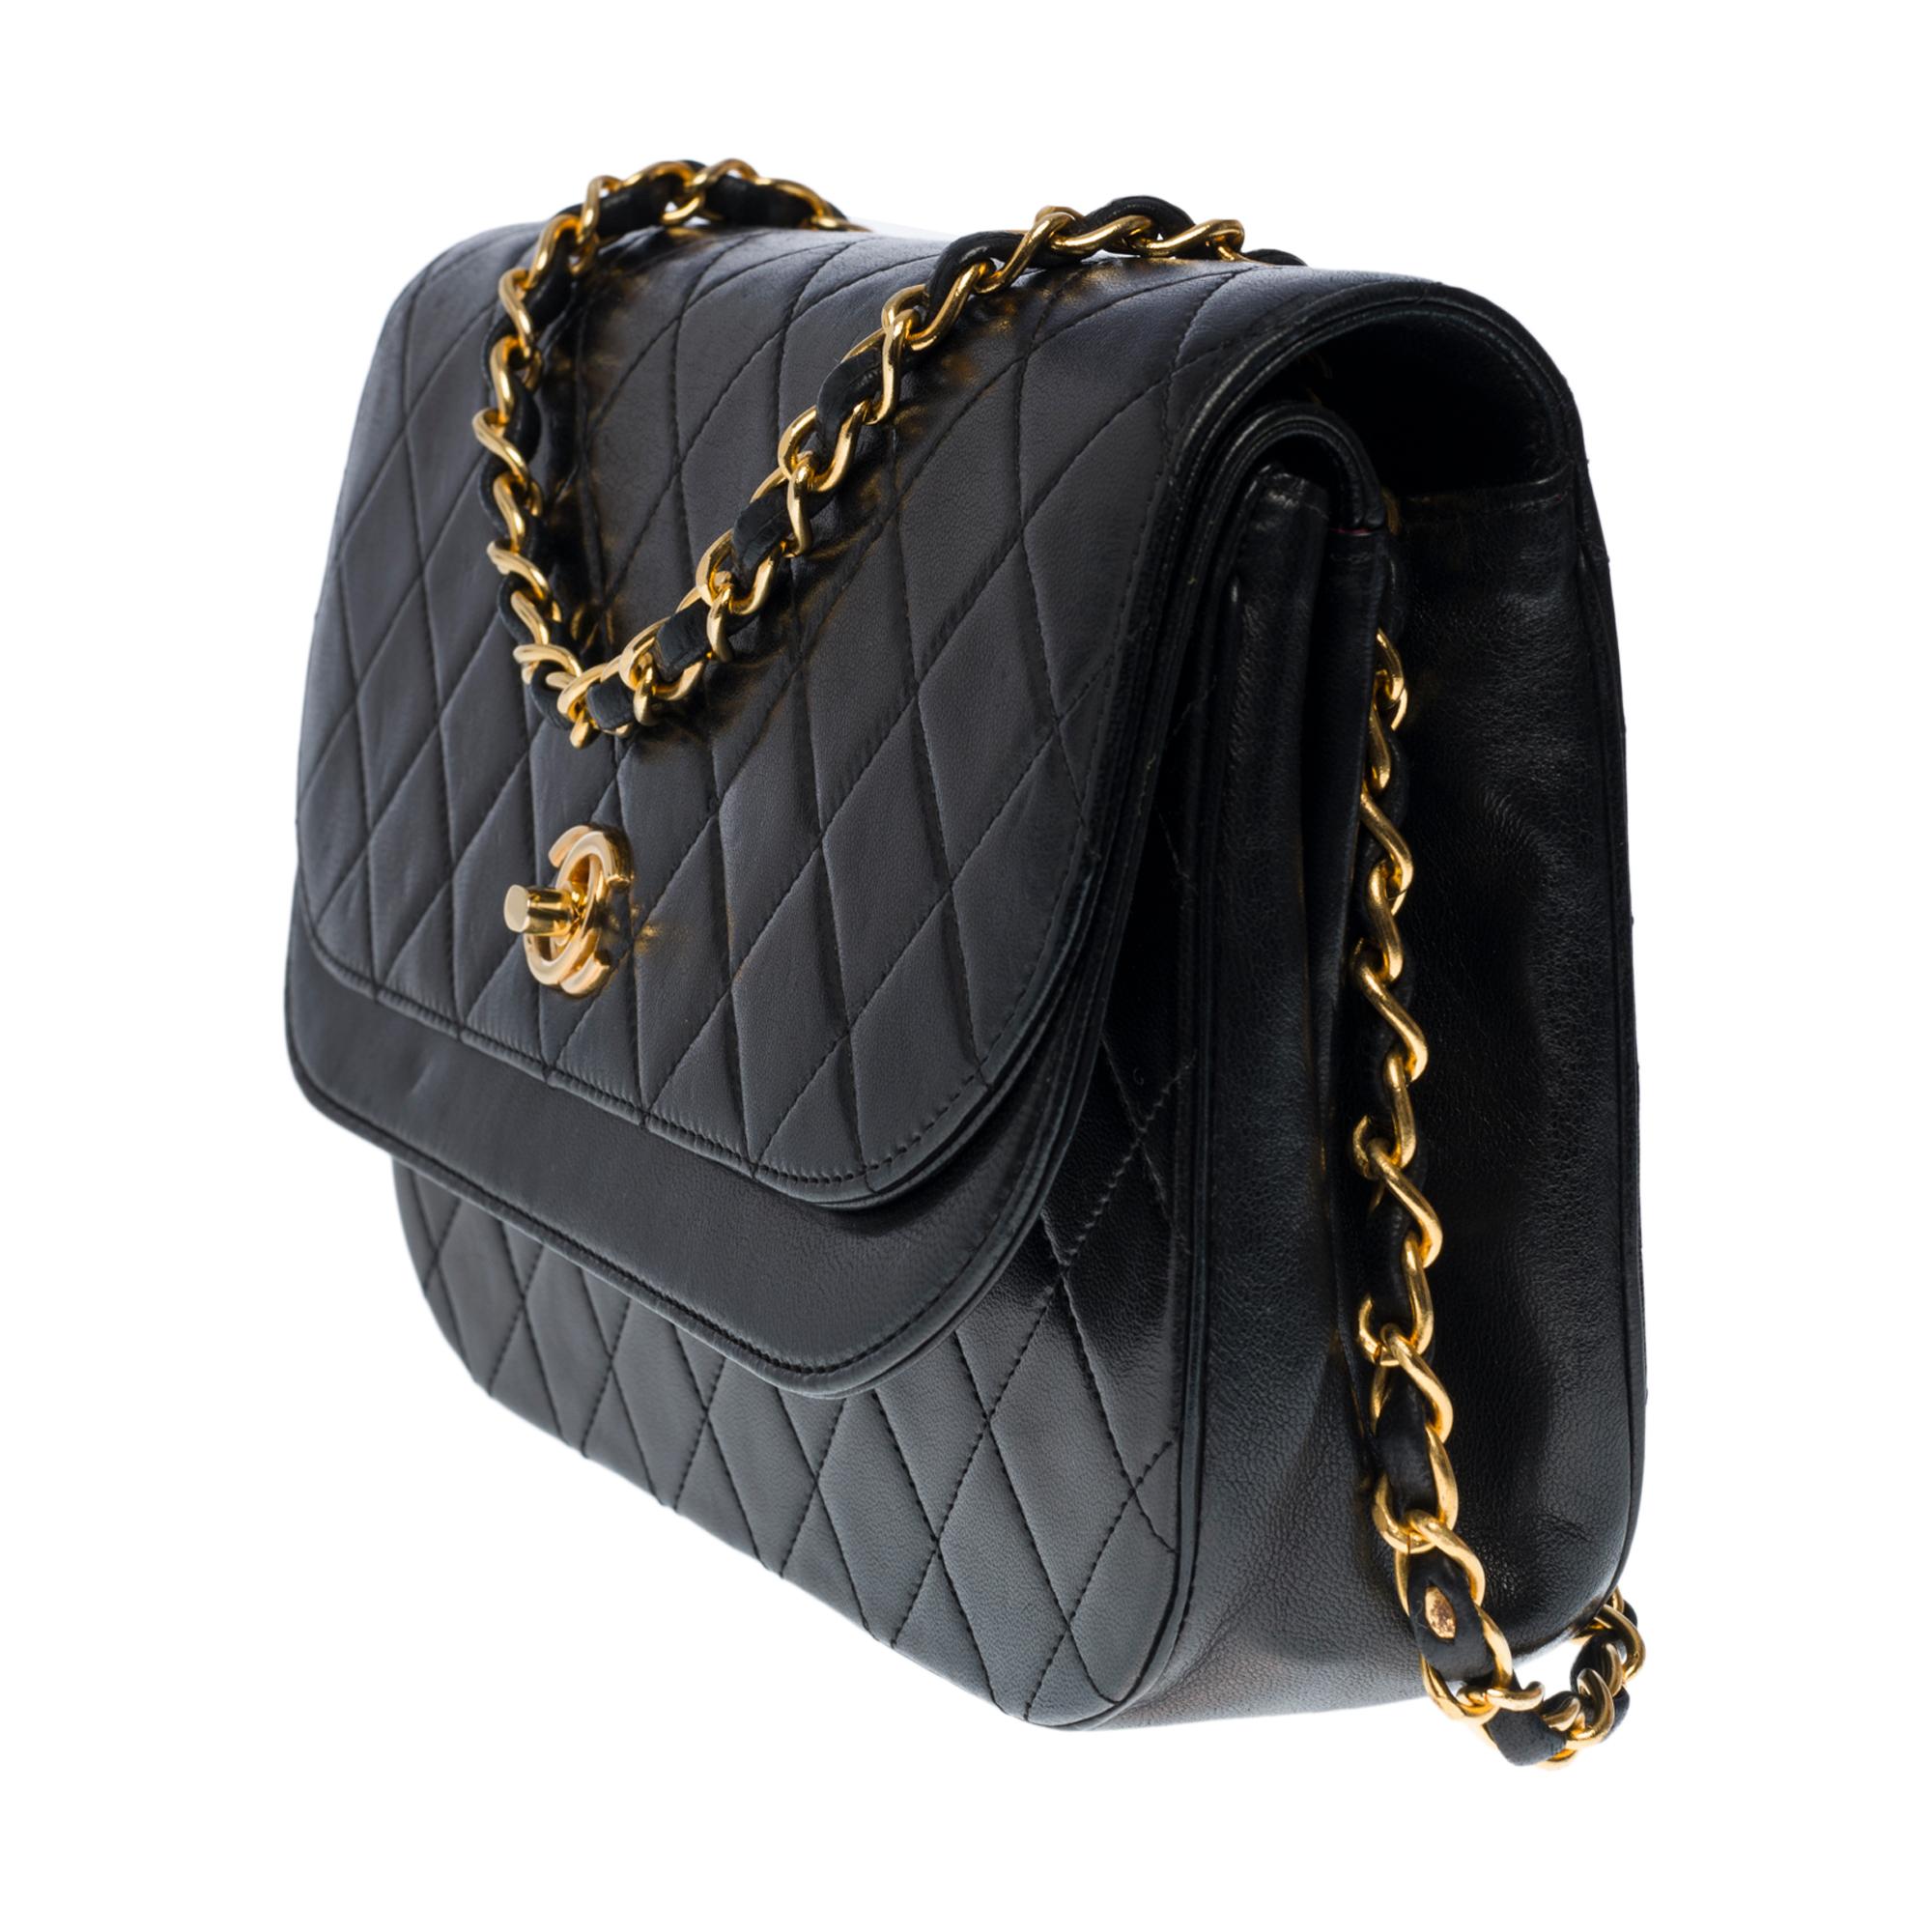 Black Chanel Classic Demi-Lune shoulder Flap bag in black quilted leather, GHW